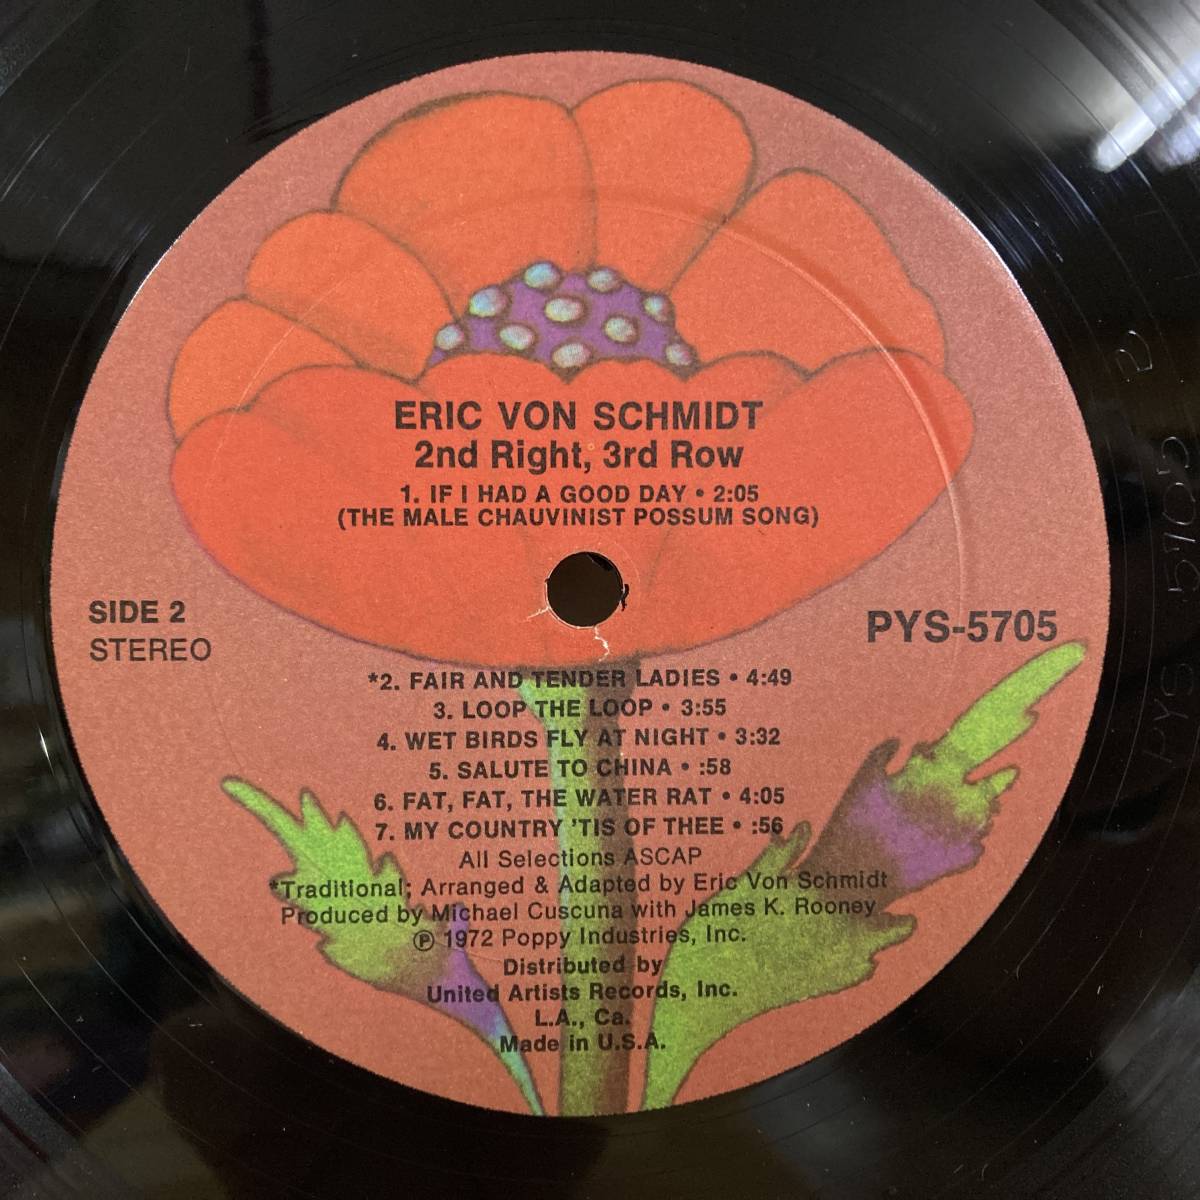 X7■【US盤/LP】Eric Von Schmidt エリック・フォン・シュミット / 2nd Right 3rd Row ● Poppy / PYS-5705 / USフォーク 231023_画像8